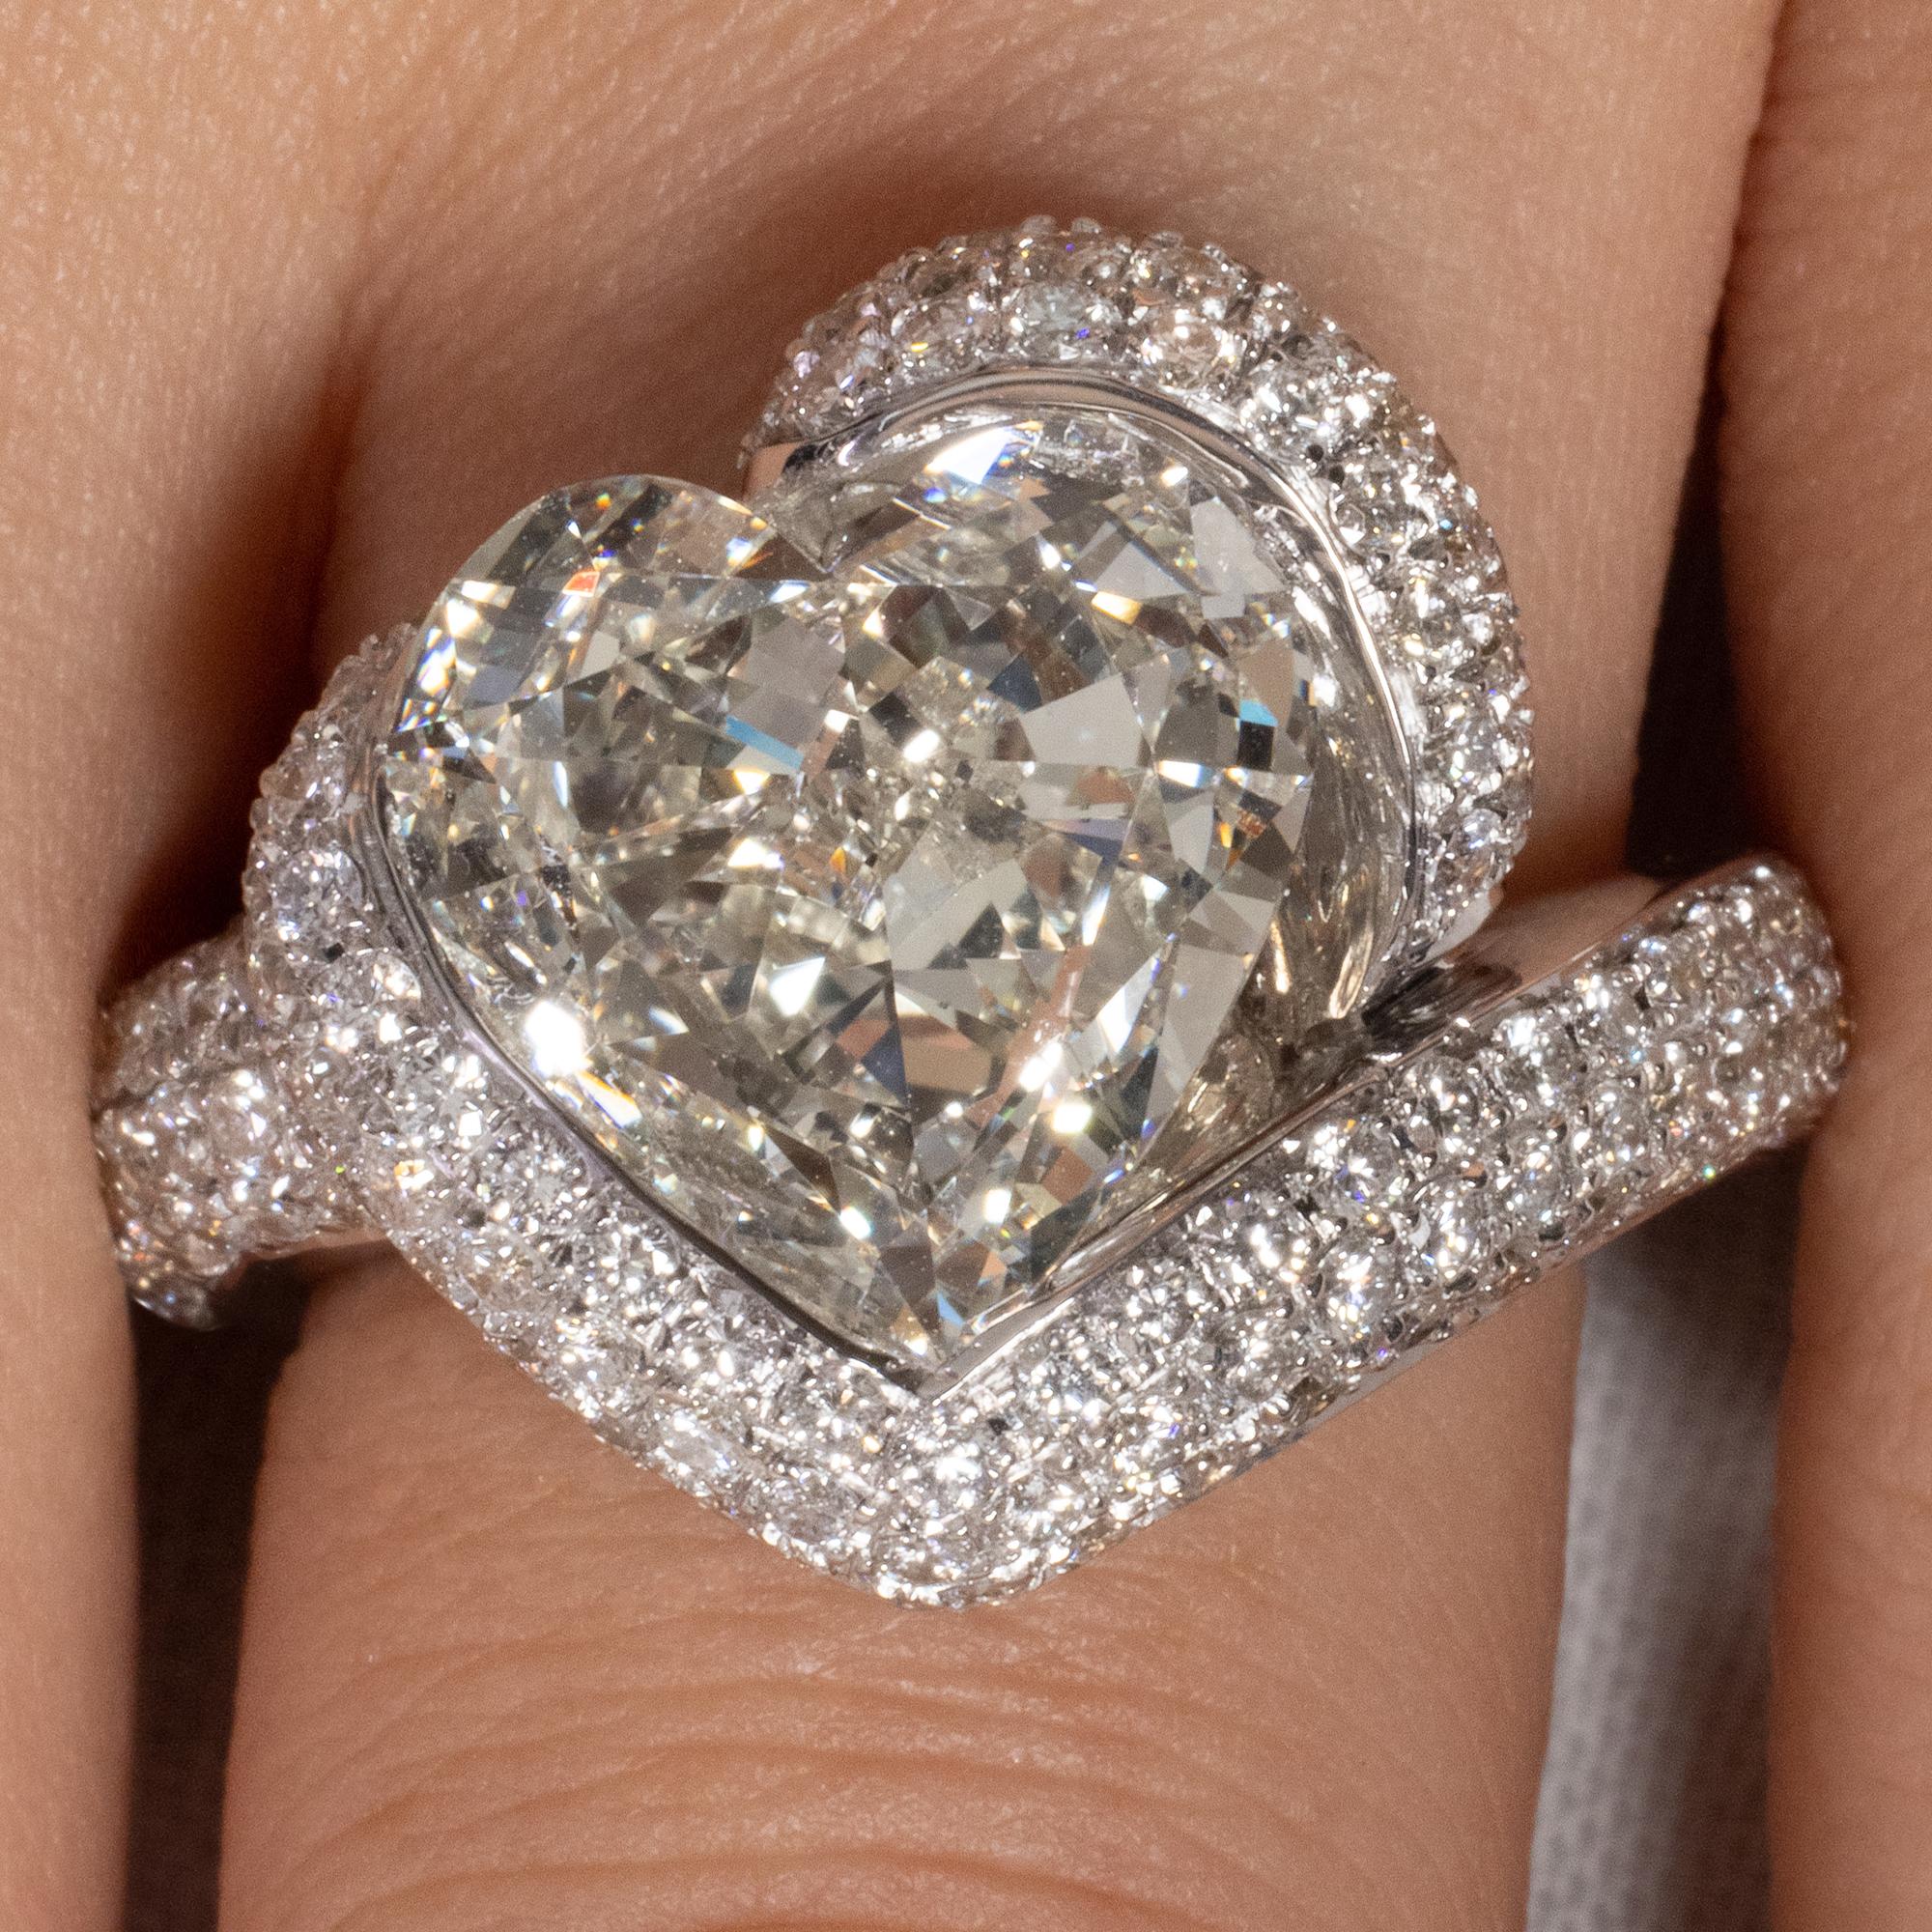 Gorgeous Timeless 18k White Gold (stamped) Heart Diamond Engagement Anniversary or Right Hand Ring. The Center Stone is GIA Certified 5.01ct Natural Heart Shaped Diamond, in M color and VS1 clarity; with measurements of 12.07x12.01x5.50mm. GIA